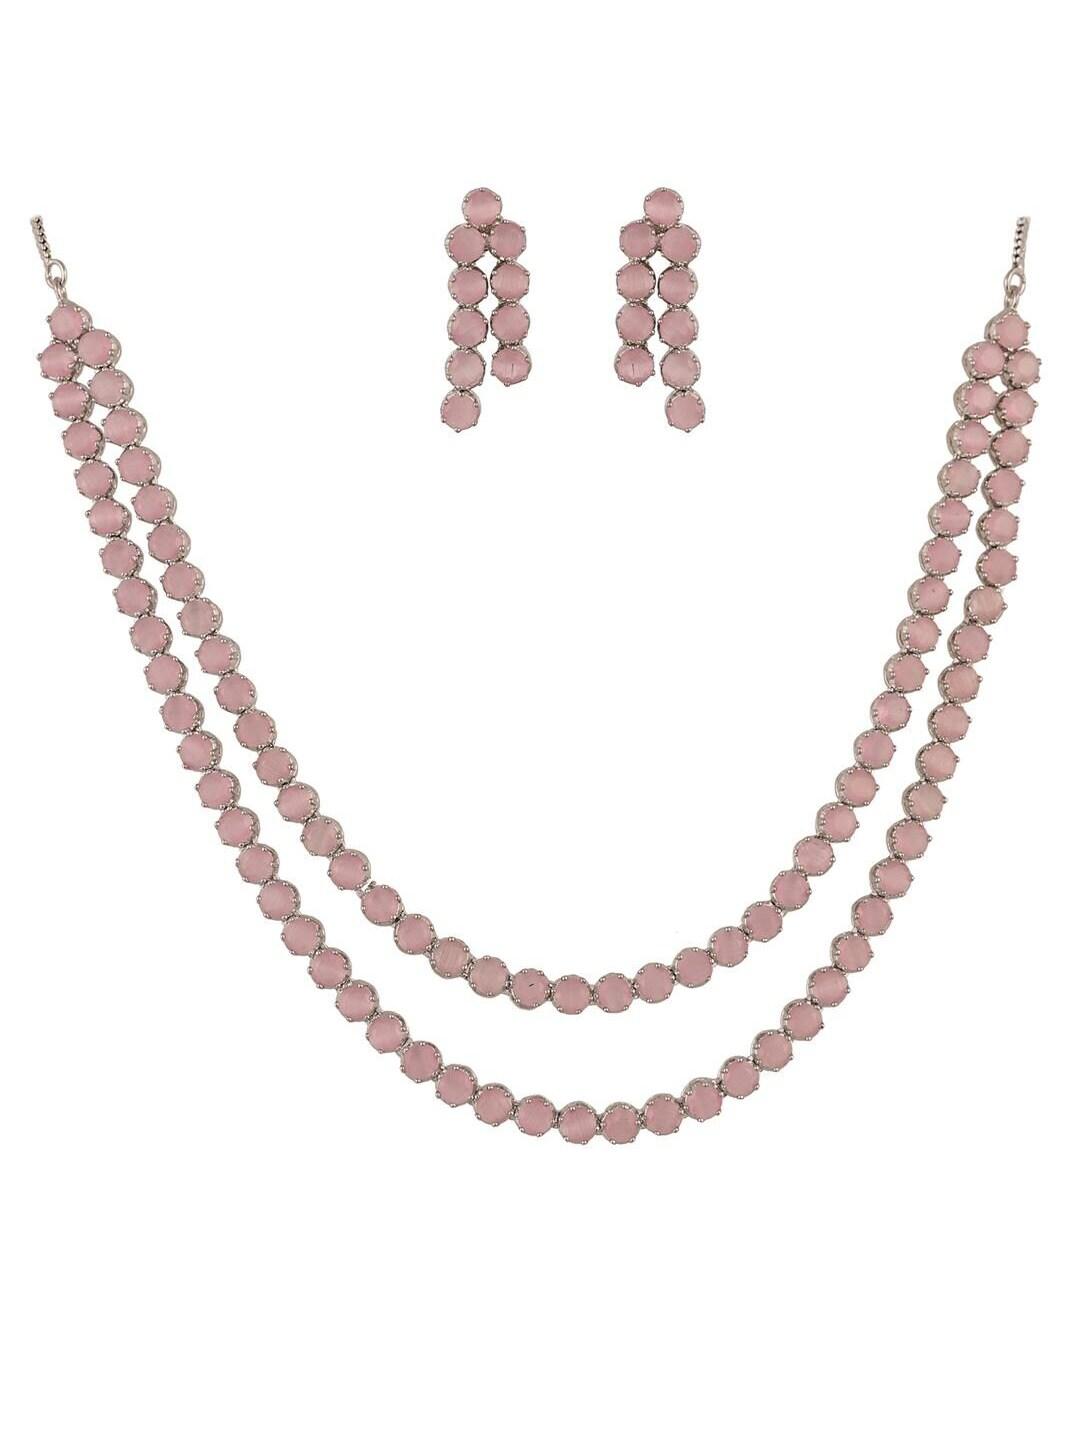 ratnavali jewels silver-plated cz-studded necklace & earrings